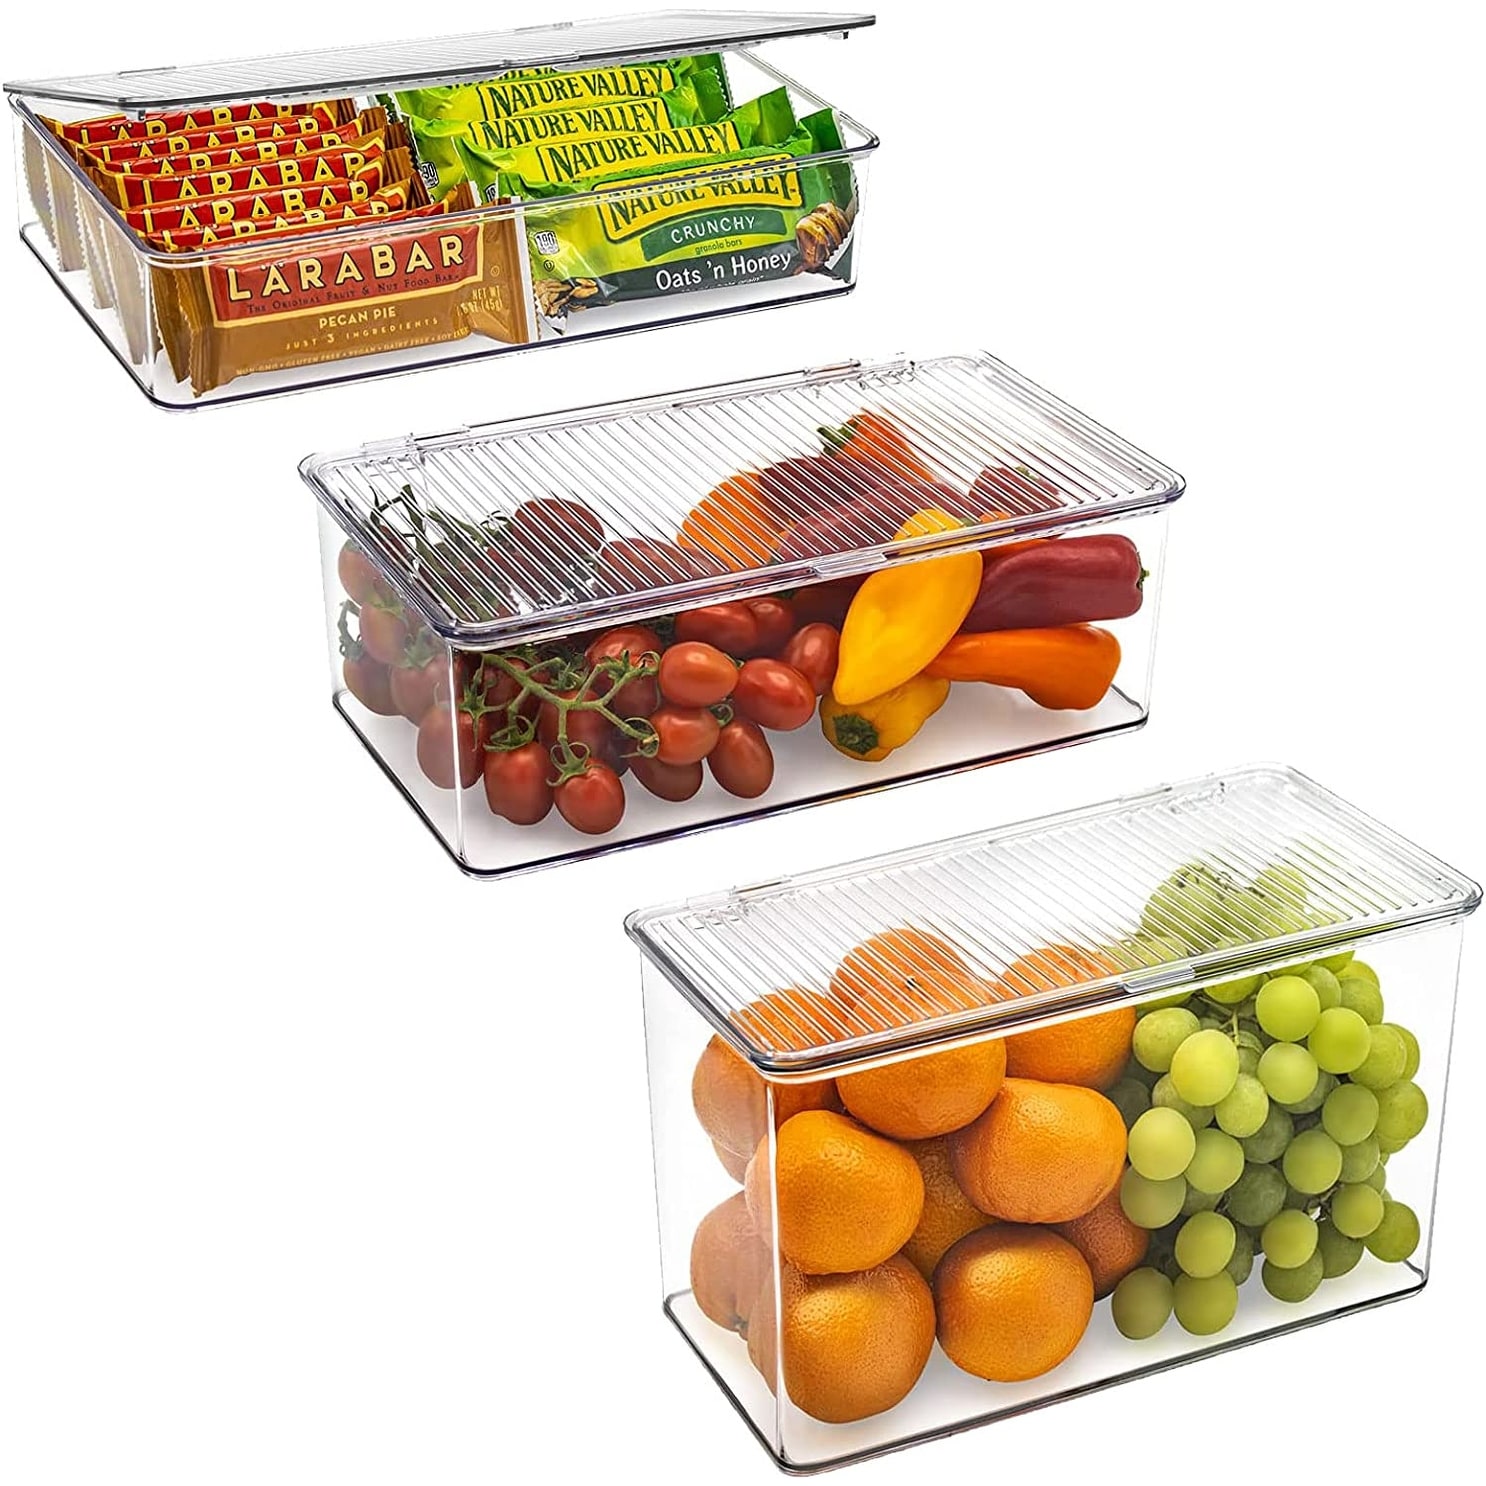 https://ak1.ostkcdn.com/images/products/is/images/direct/f11f819445e6f05bb316d51bb66bec3e9ec1bdd8/Sorbus-Organizer-Bin-w-Lids%2C-Food-Storage-Containers-for-Kitchen-Pantry-%26-Fridge%2C-Small.jpg